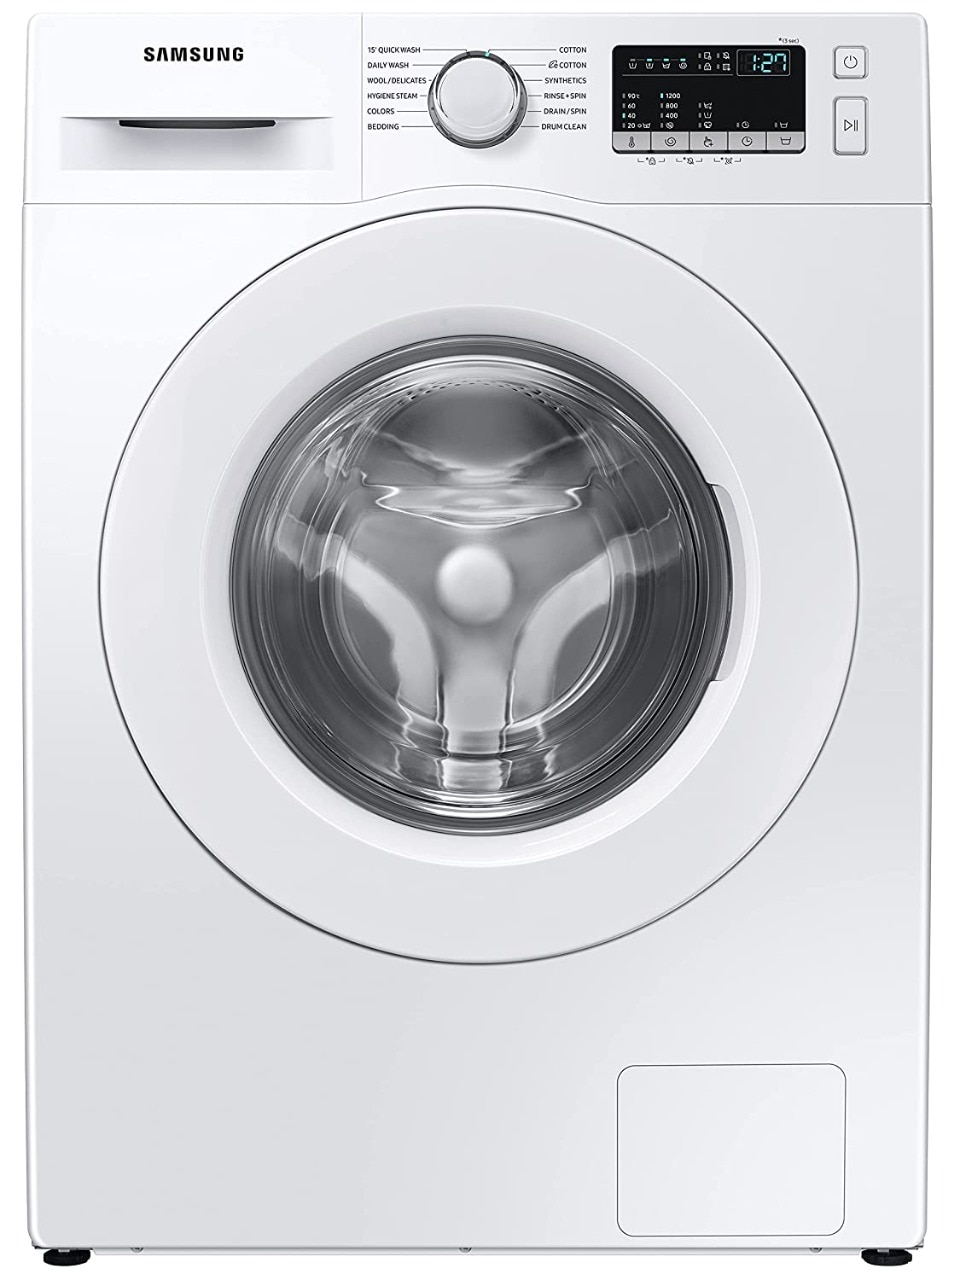 Amazon Great Indian Festival Sale: Sale on front loading washing machines of every brand, more than 35% discount on Amazon